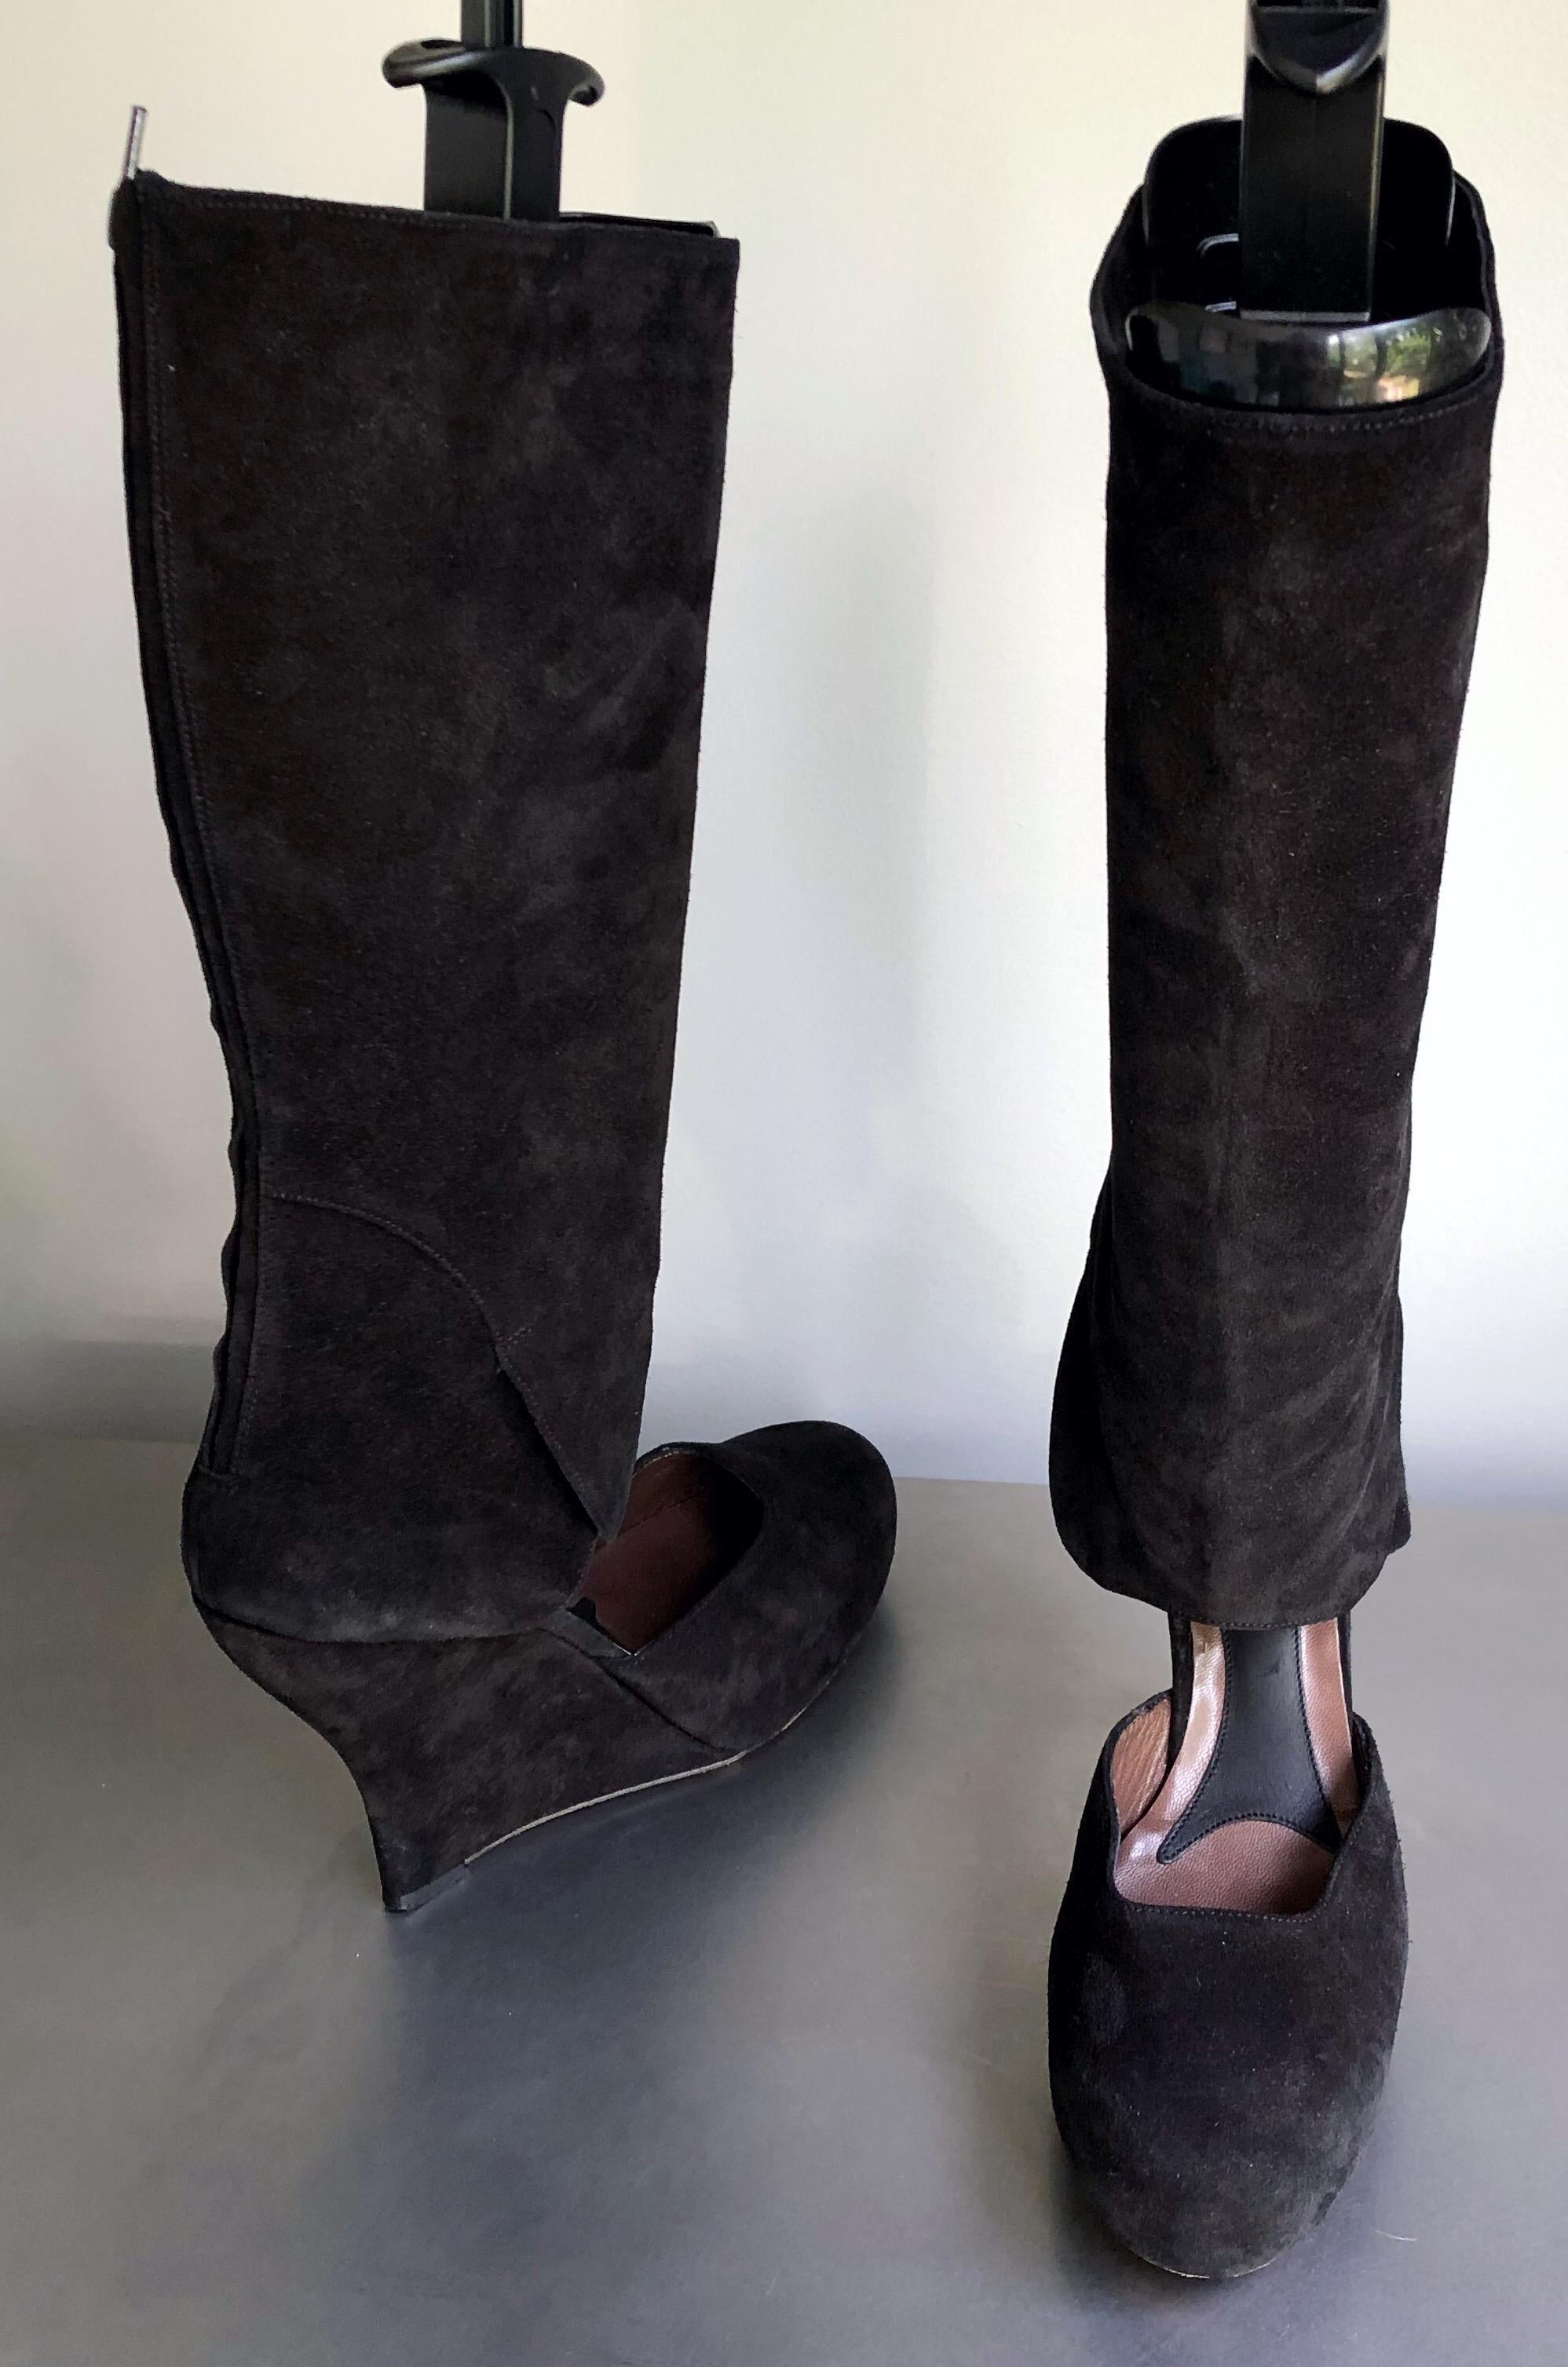 Early 2000s MARNI black suede leather cut-out knee high wedges boots ! The perfect statements boots that retailed for $1,700 when purchased. Can easily be dressed up or down, day or evening. Zipper up the inner calf. 
Worn once for a photo shoot. In